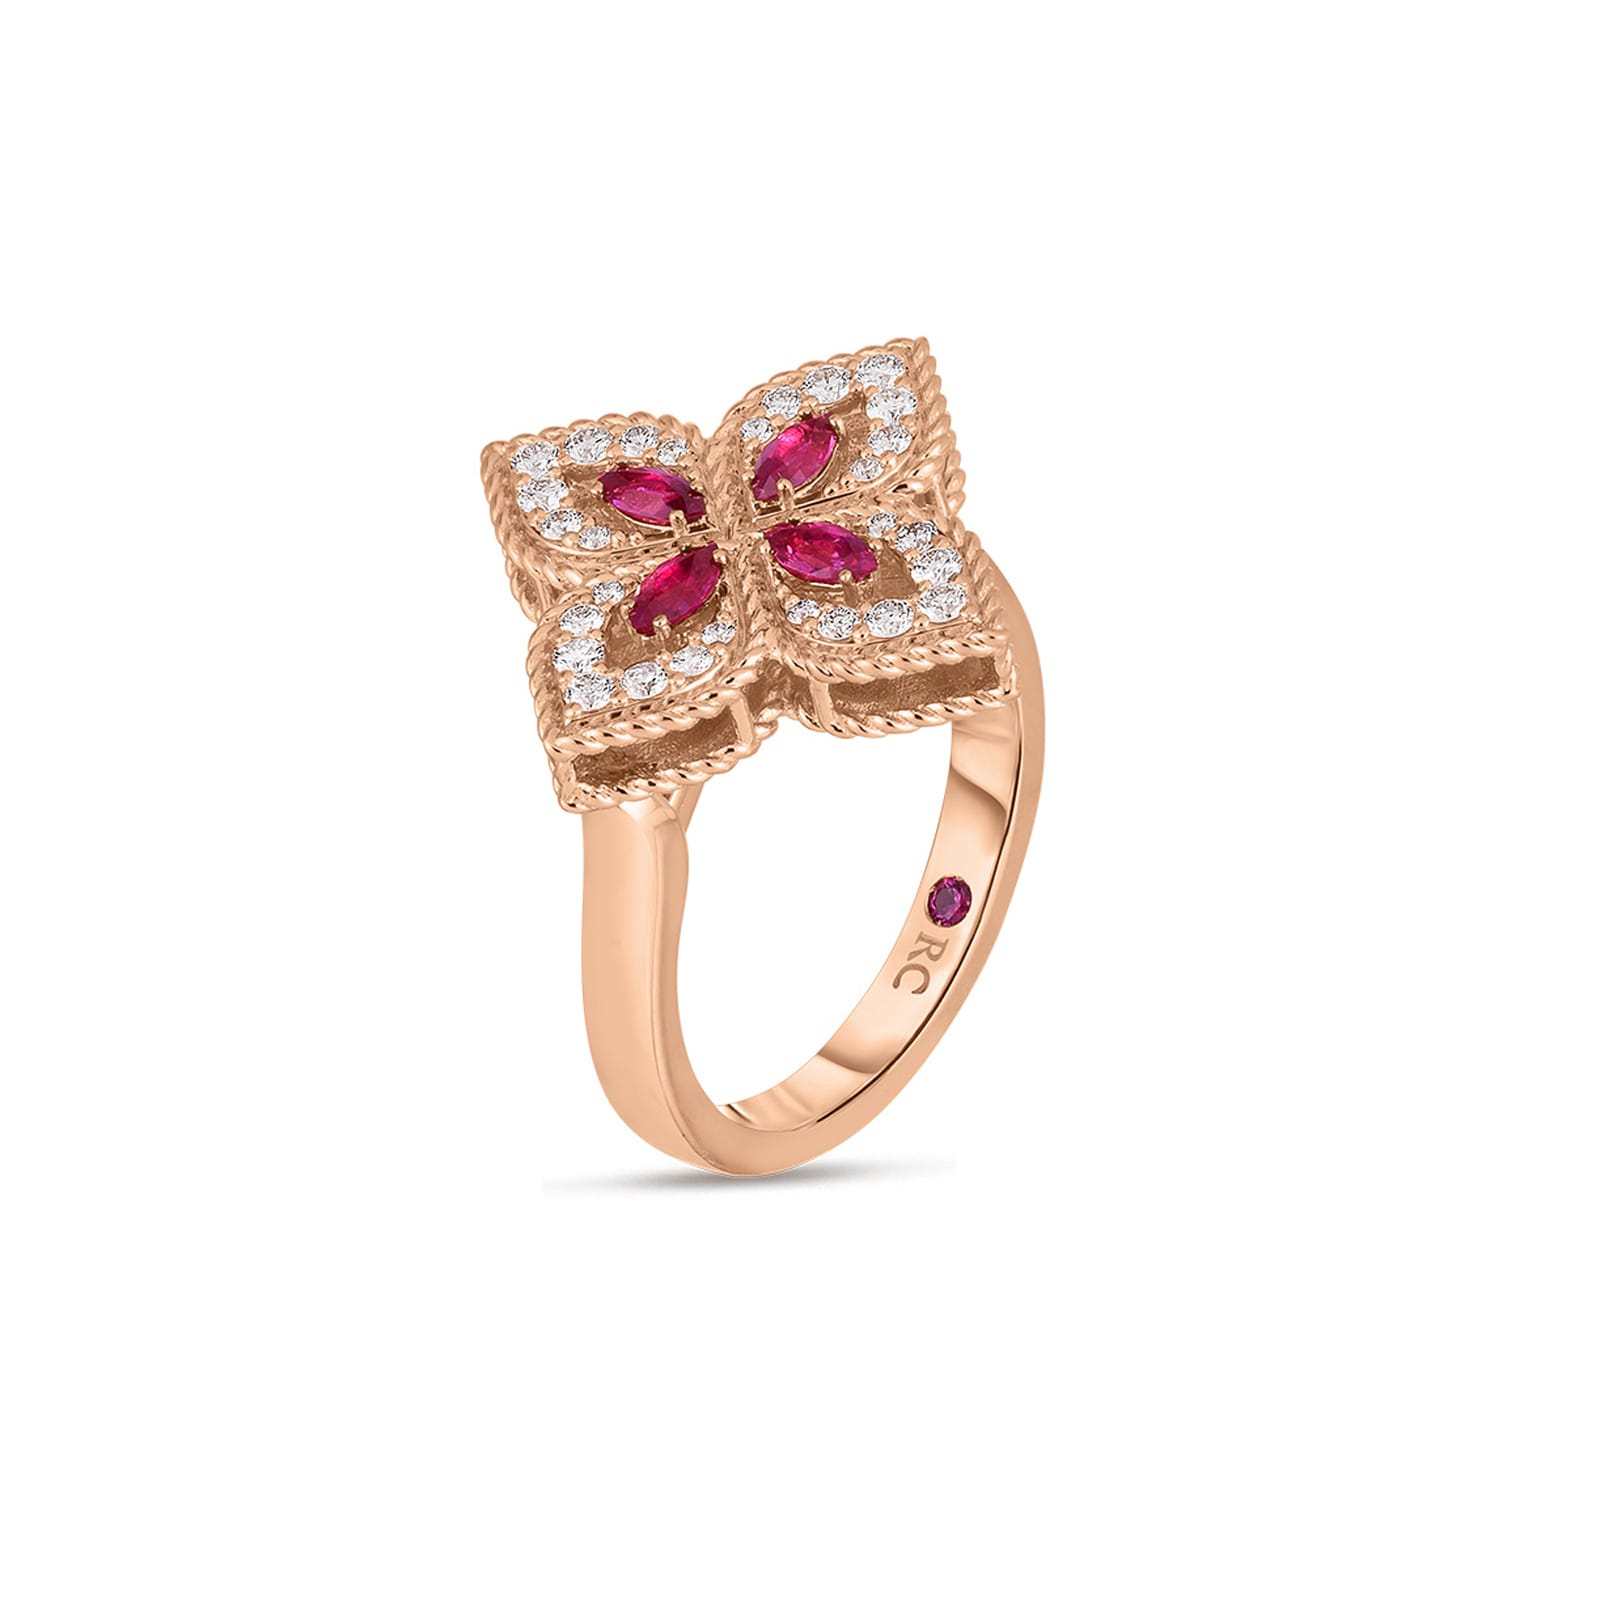 Exclusive 18ct Rose Gold Venetian Princess 0.26ct Diamond & Ruby Ring - Ring Size L